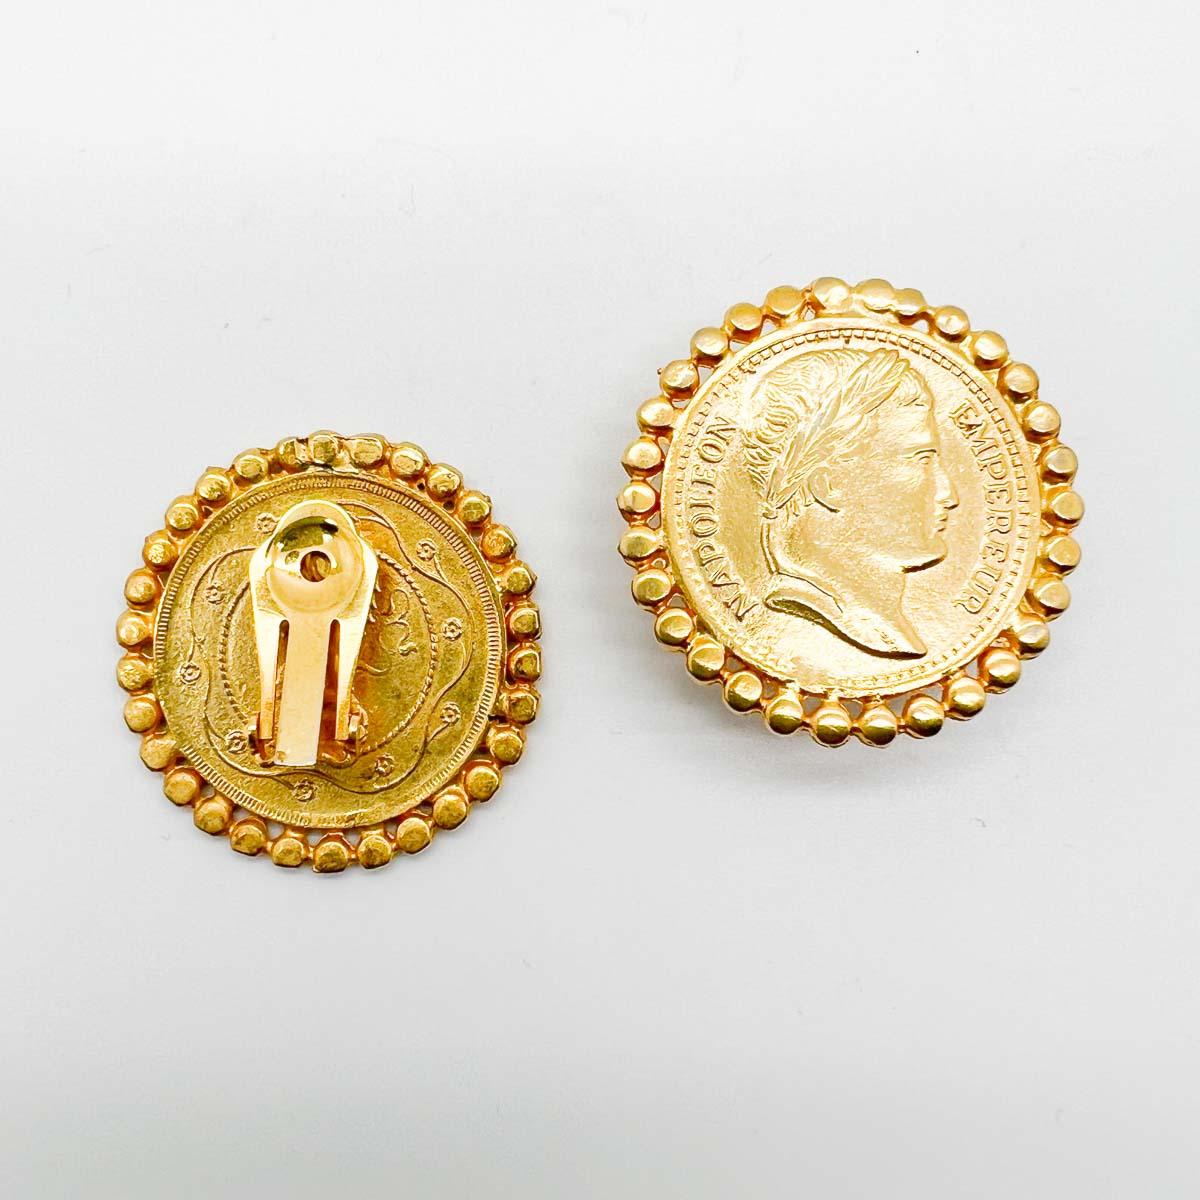 A pair of Vintage Napoleon Coin Earrings. Classic coin earrings with a lustrous gold finish and heaps of statement style.
An unsigned beauty. A rare treasure. Just because a jewel doesn’t carry a designer name, doesn’t mean it isn't coveted. The